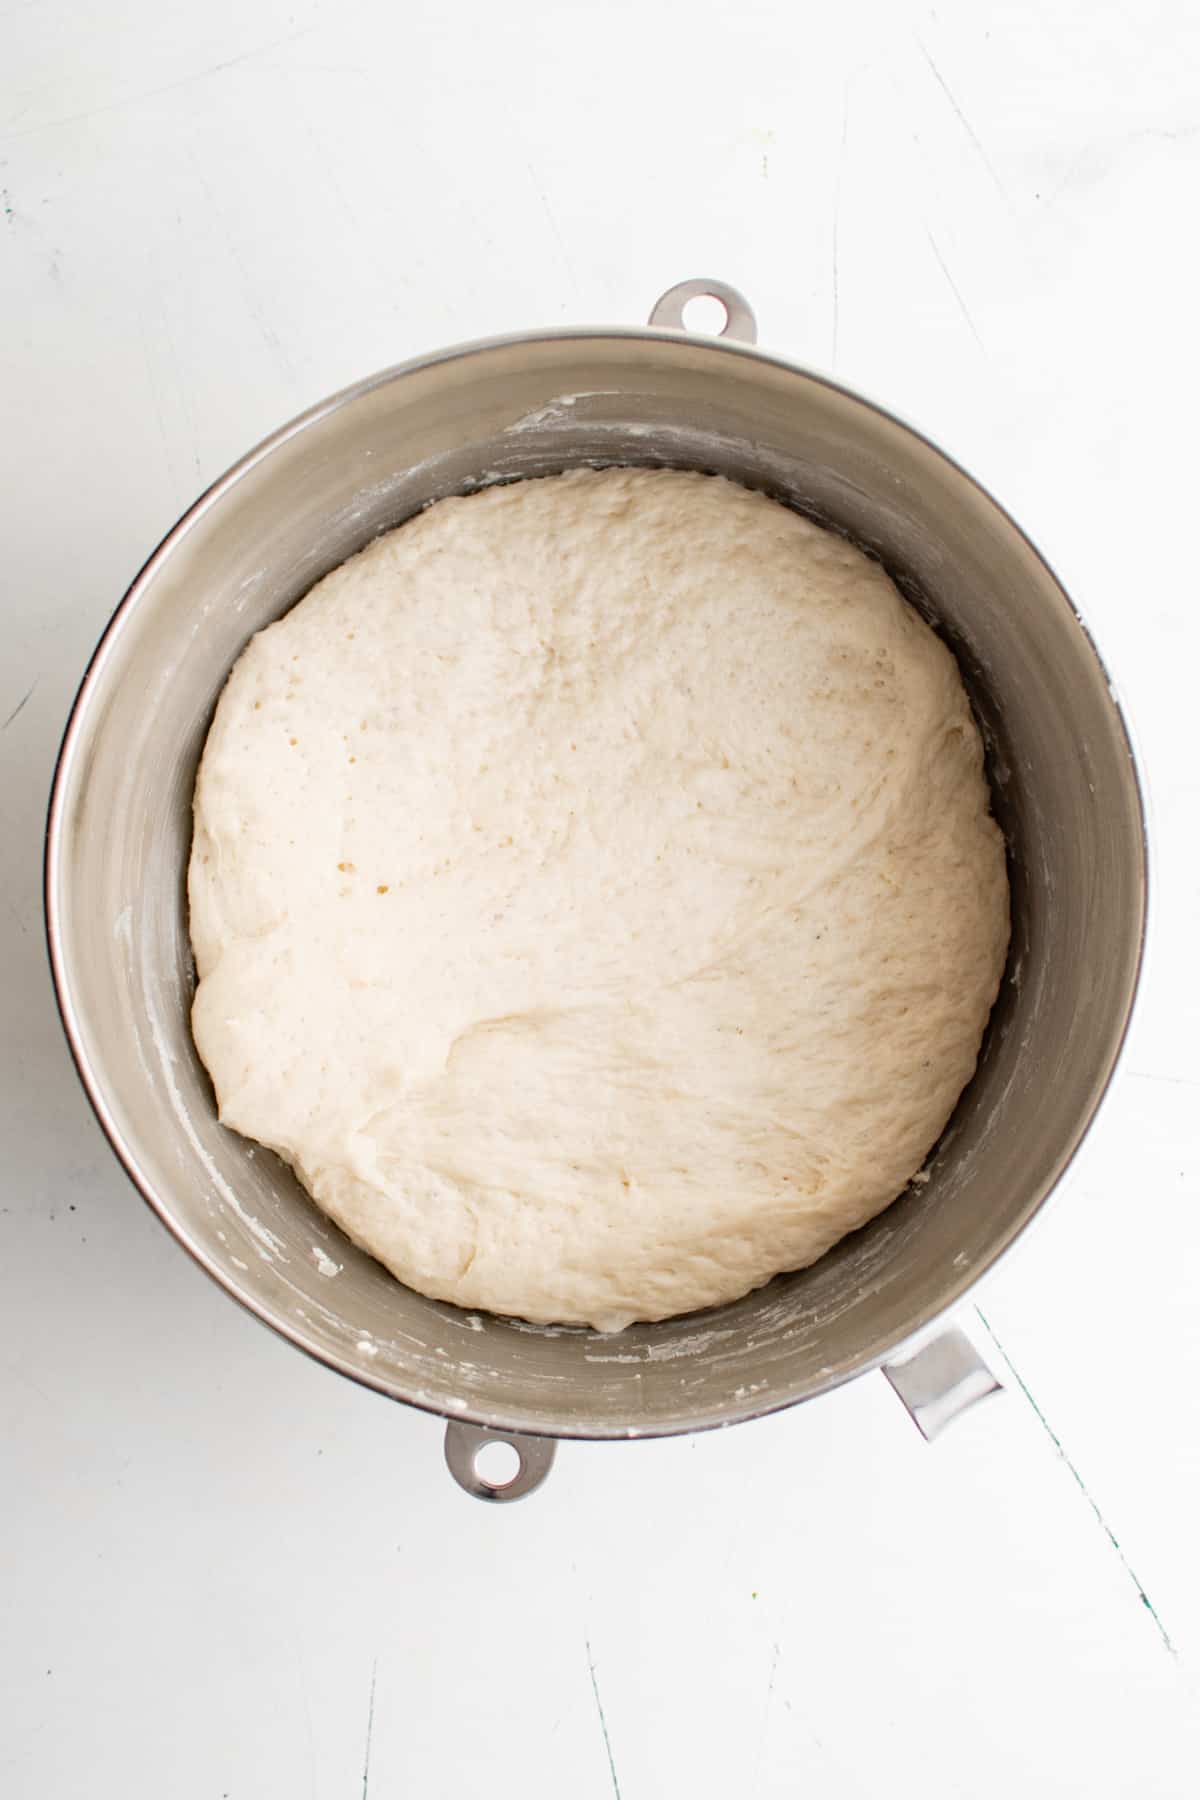 Homemade dough in a bowl after rising.